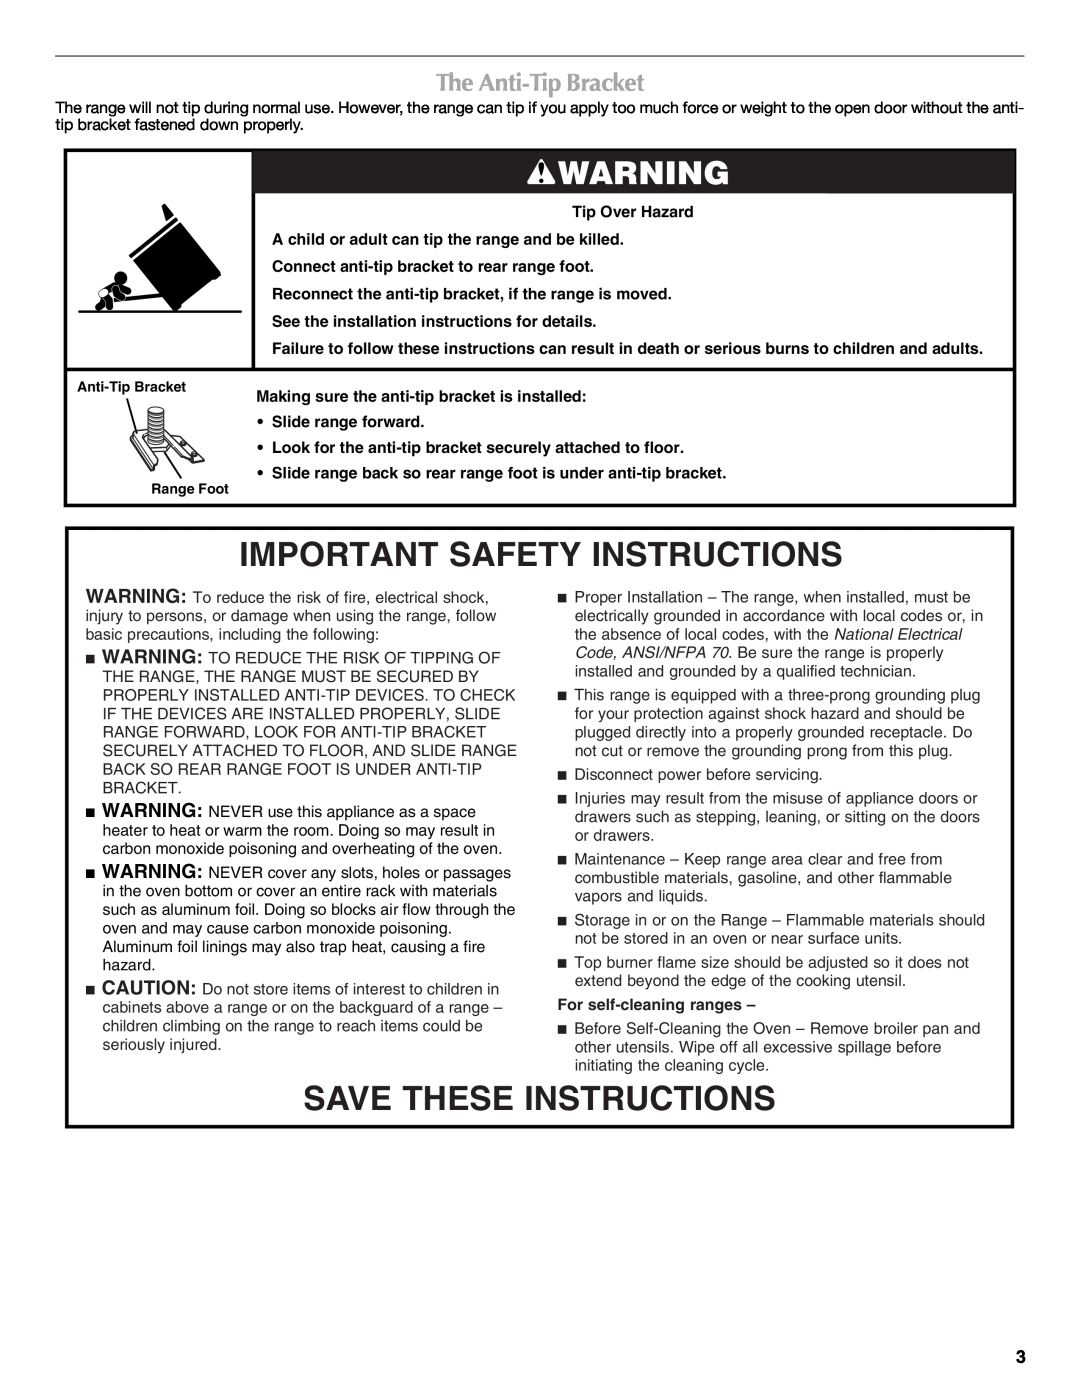 Maytag W10269530A The Anti-Tip Bracket, Important Safety Instructions, Save These Instructions, For self-cleaning ranges 